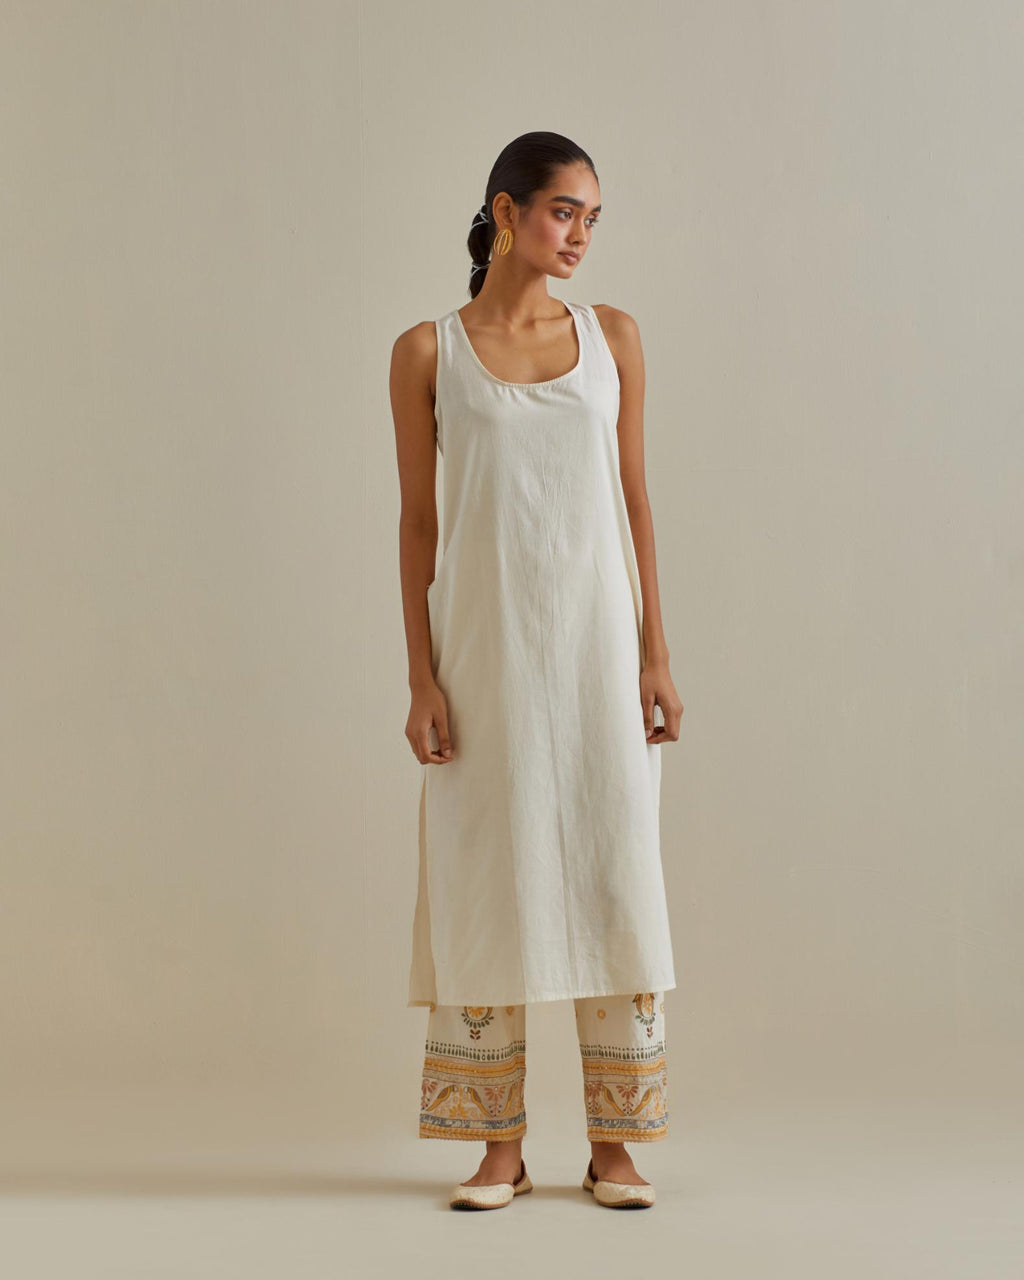 Yellow and off-white cotton chanderi straight kurta set with patchwork and thread embroidery highlighted with mirrors, sequins, tassels and braids.